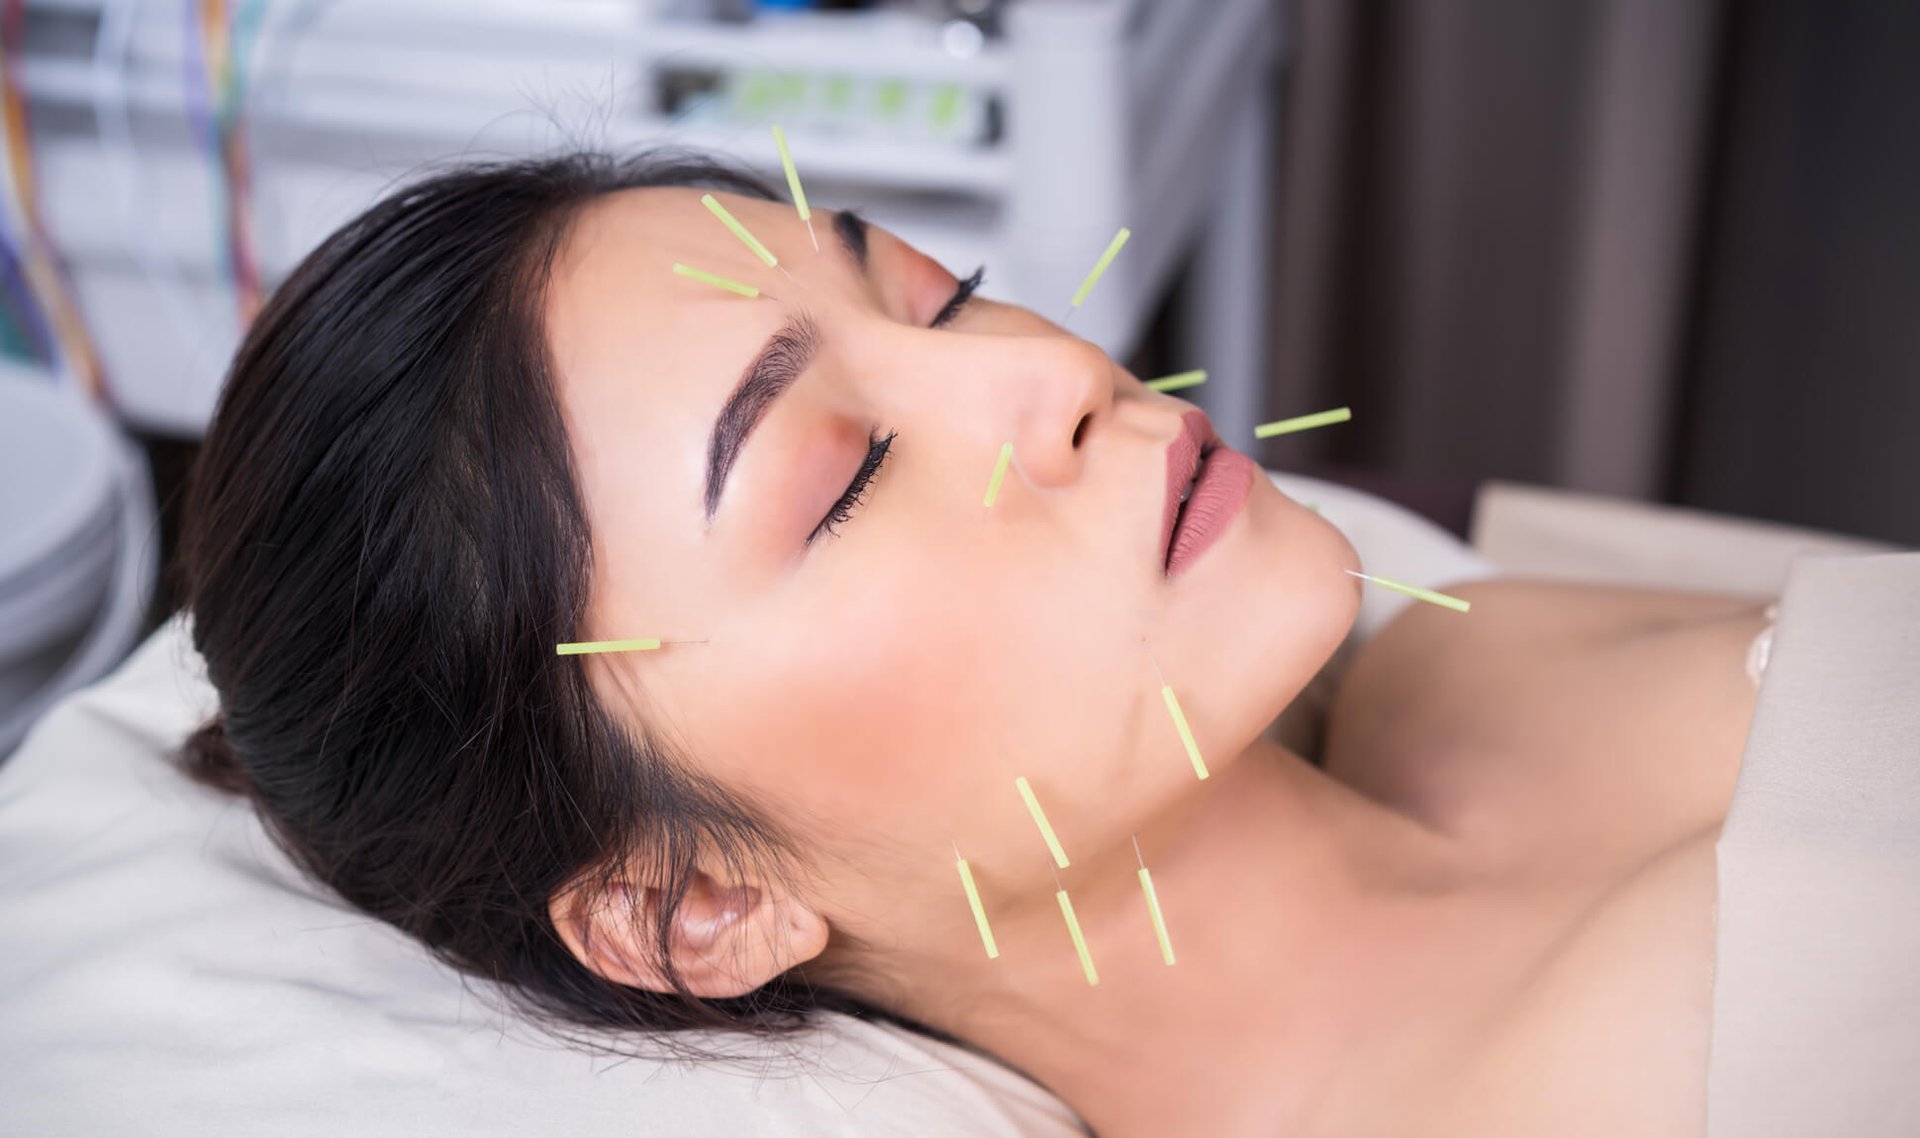 Skin Sleuth: Can Acupuncture Make Your Skin Better? 